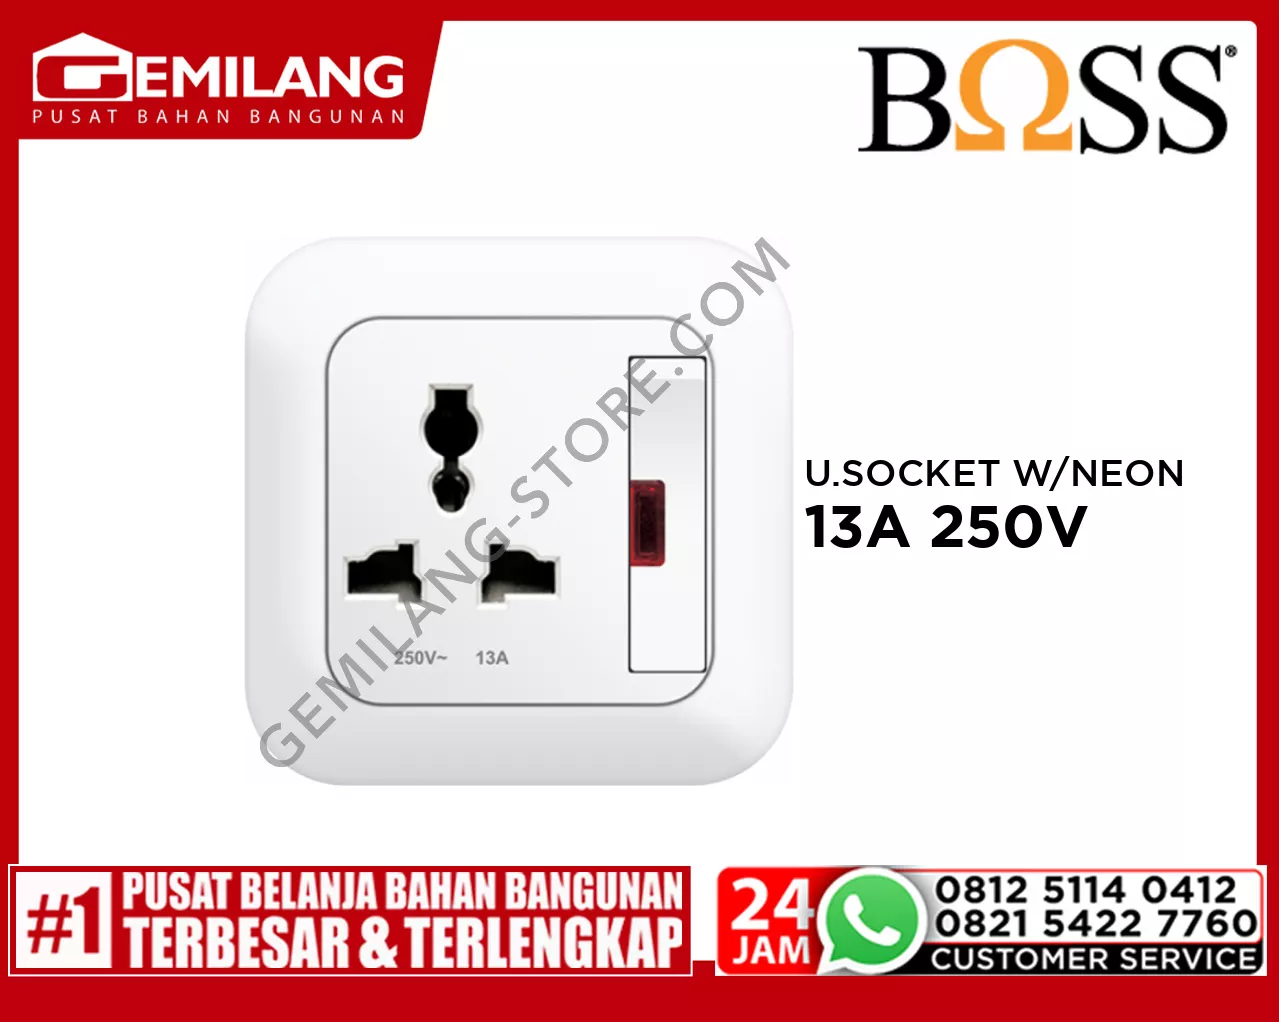 BOSS UNIVERSAL SOCKET OUTLET WITH NEON & SAFETY SHUTTER B80 13A 250V B8113LSN